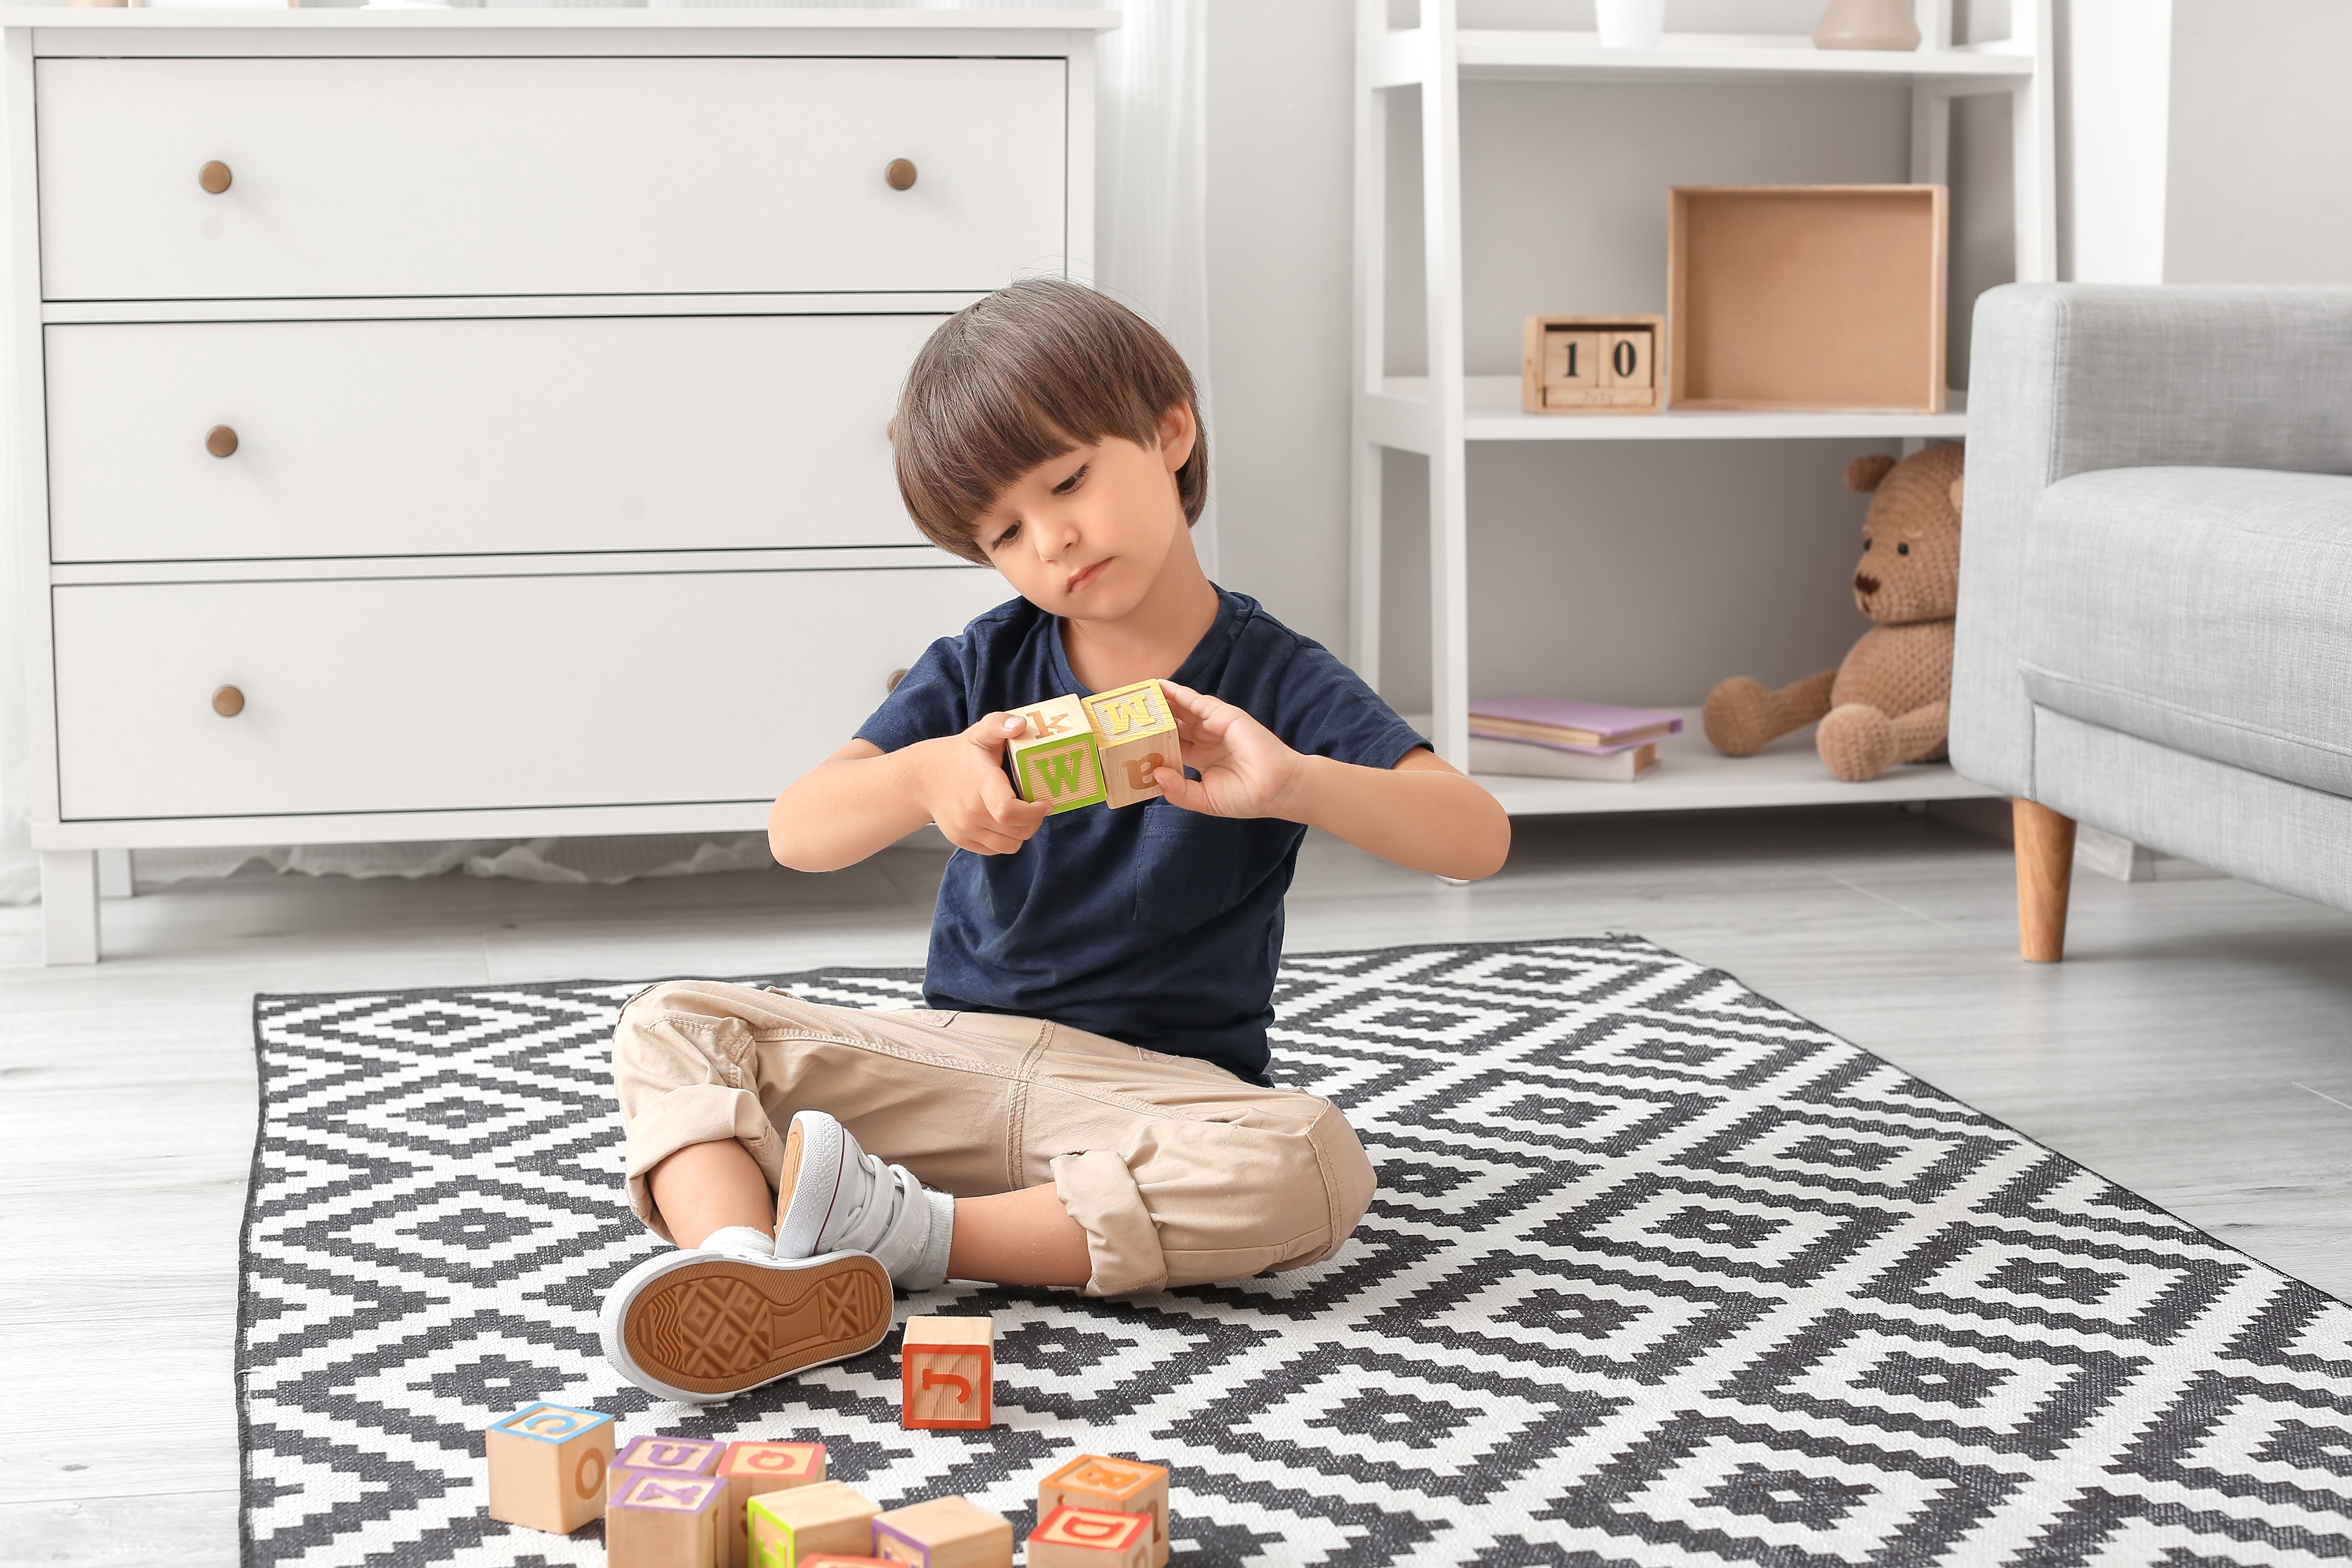 Autistic little boy playing with blocks